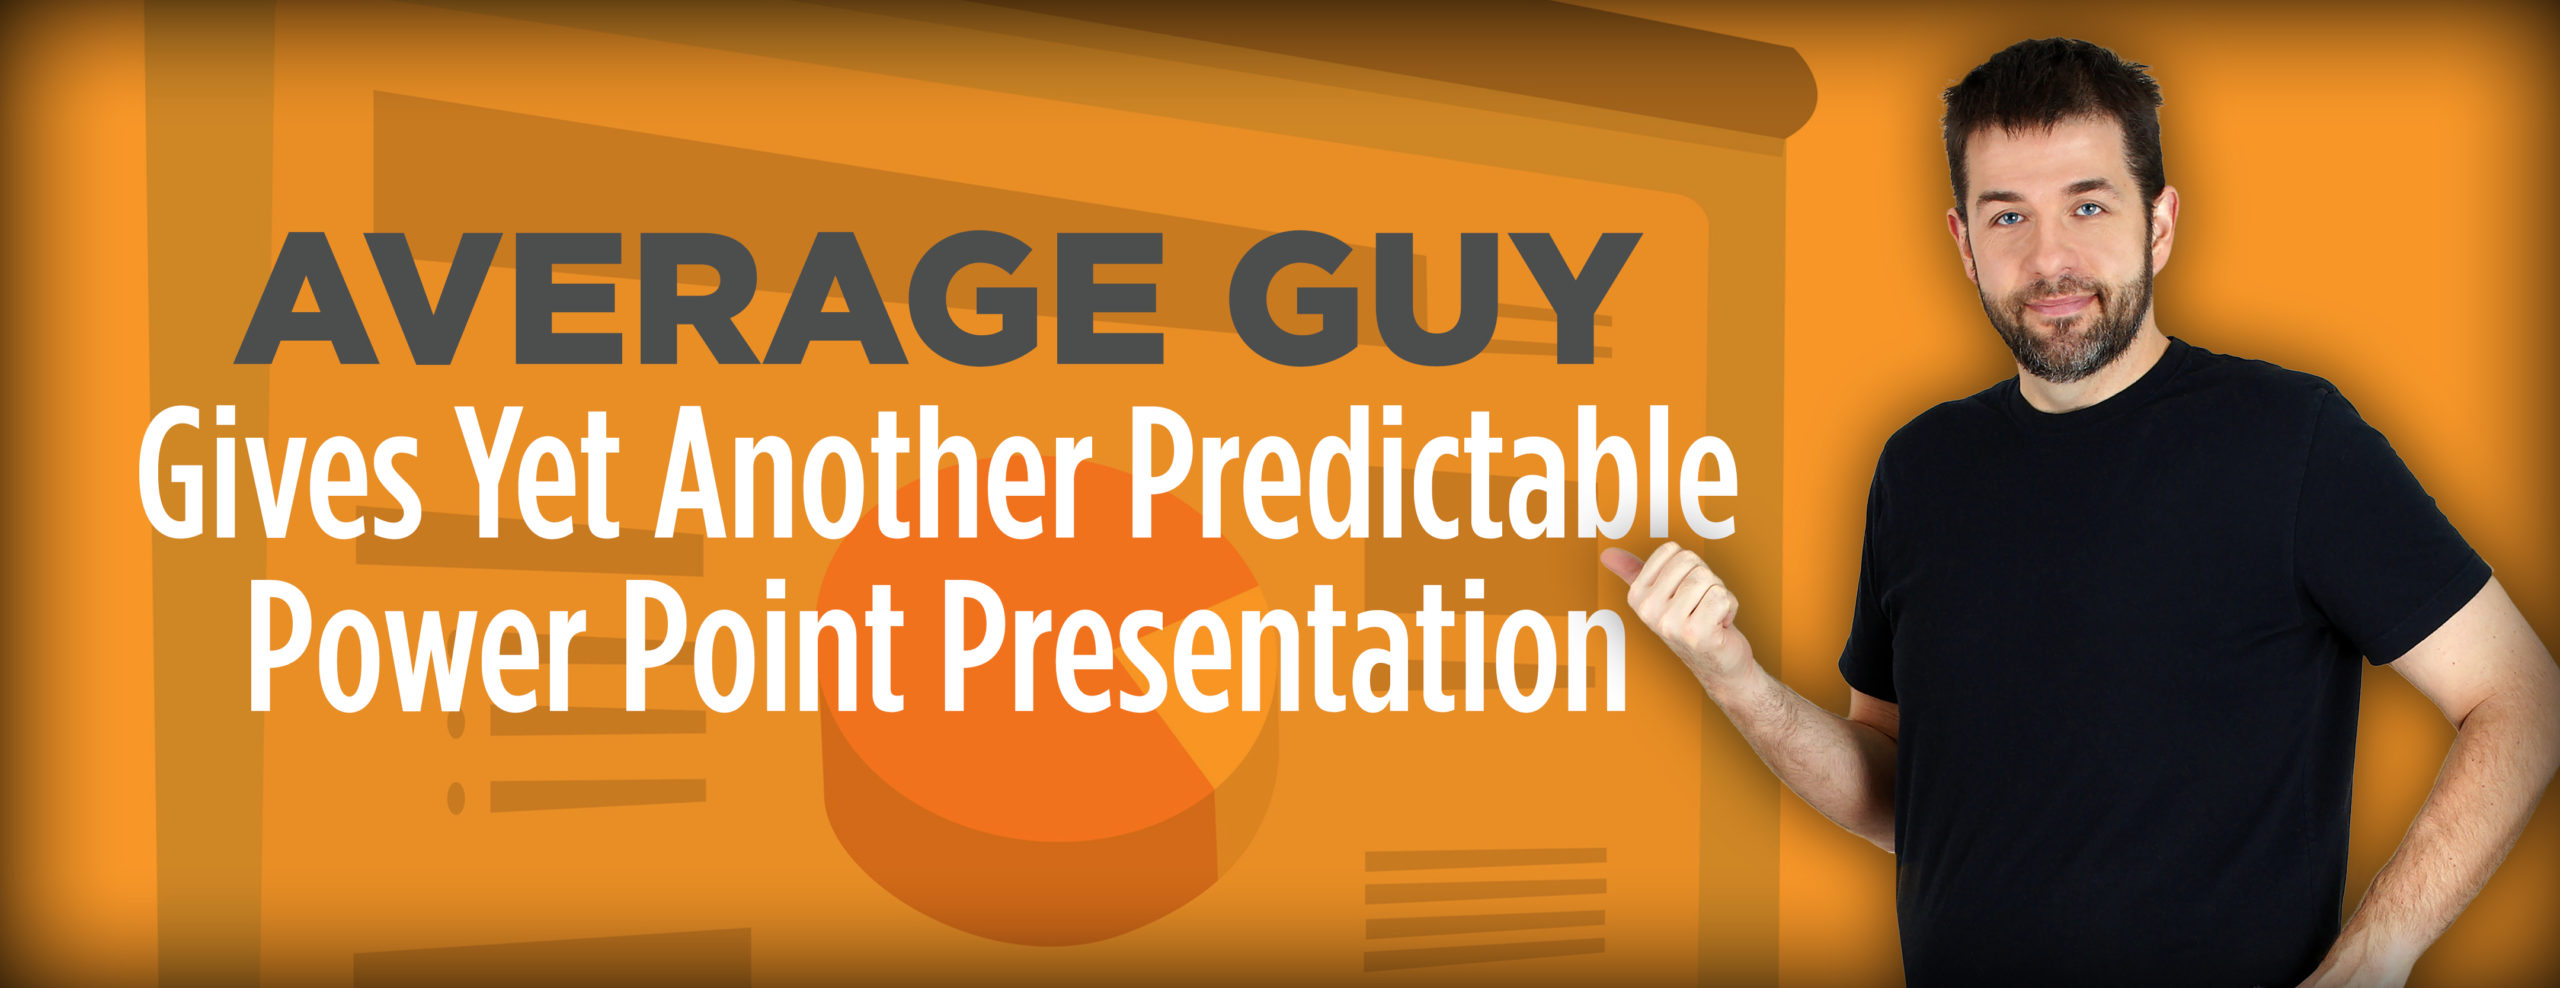 Average Guy Gives Yet Another Predictable Power Point Presentation